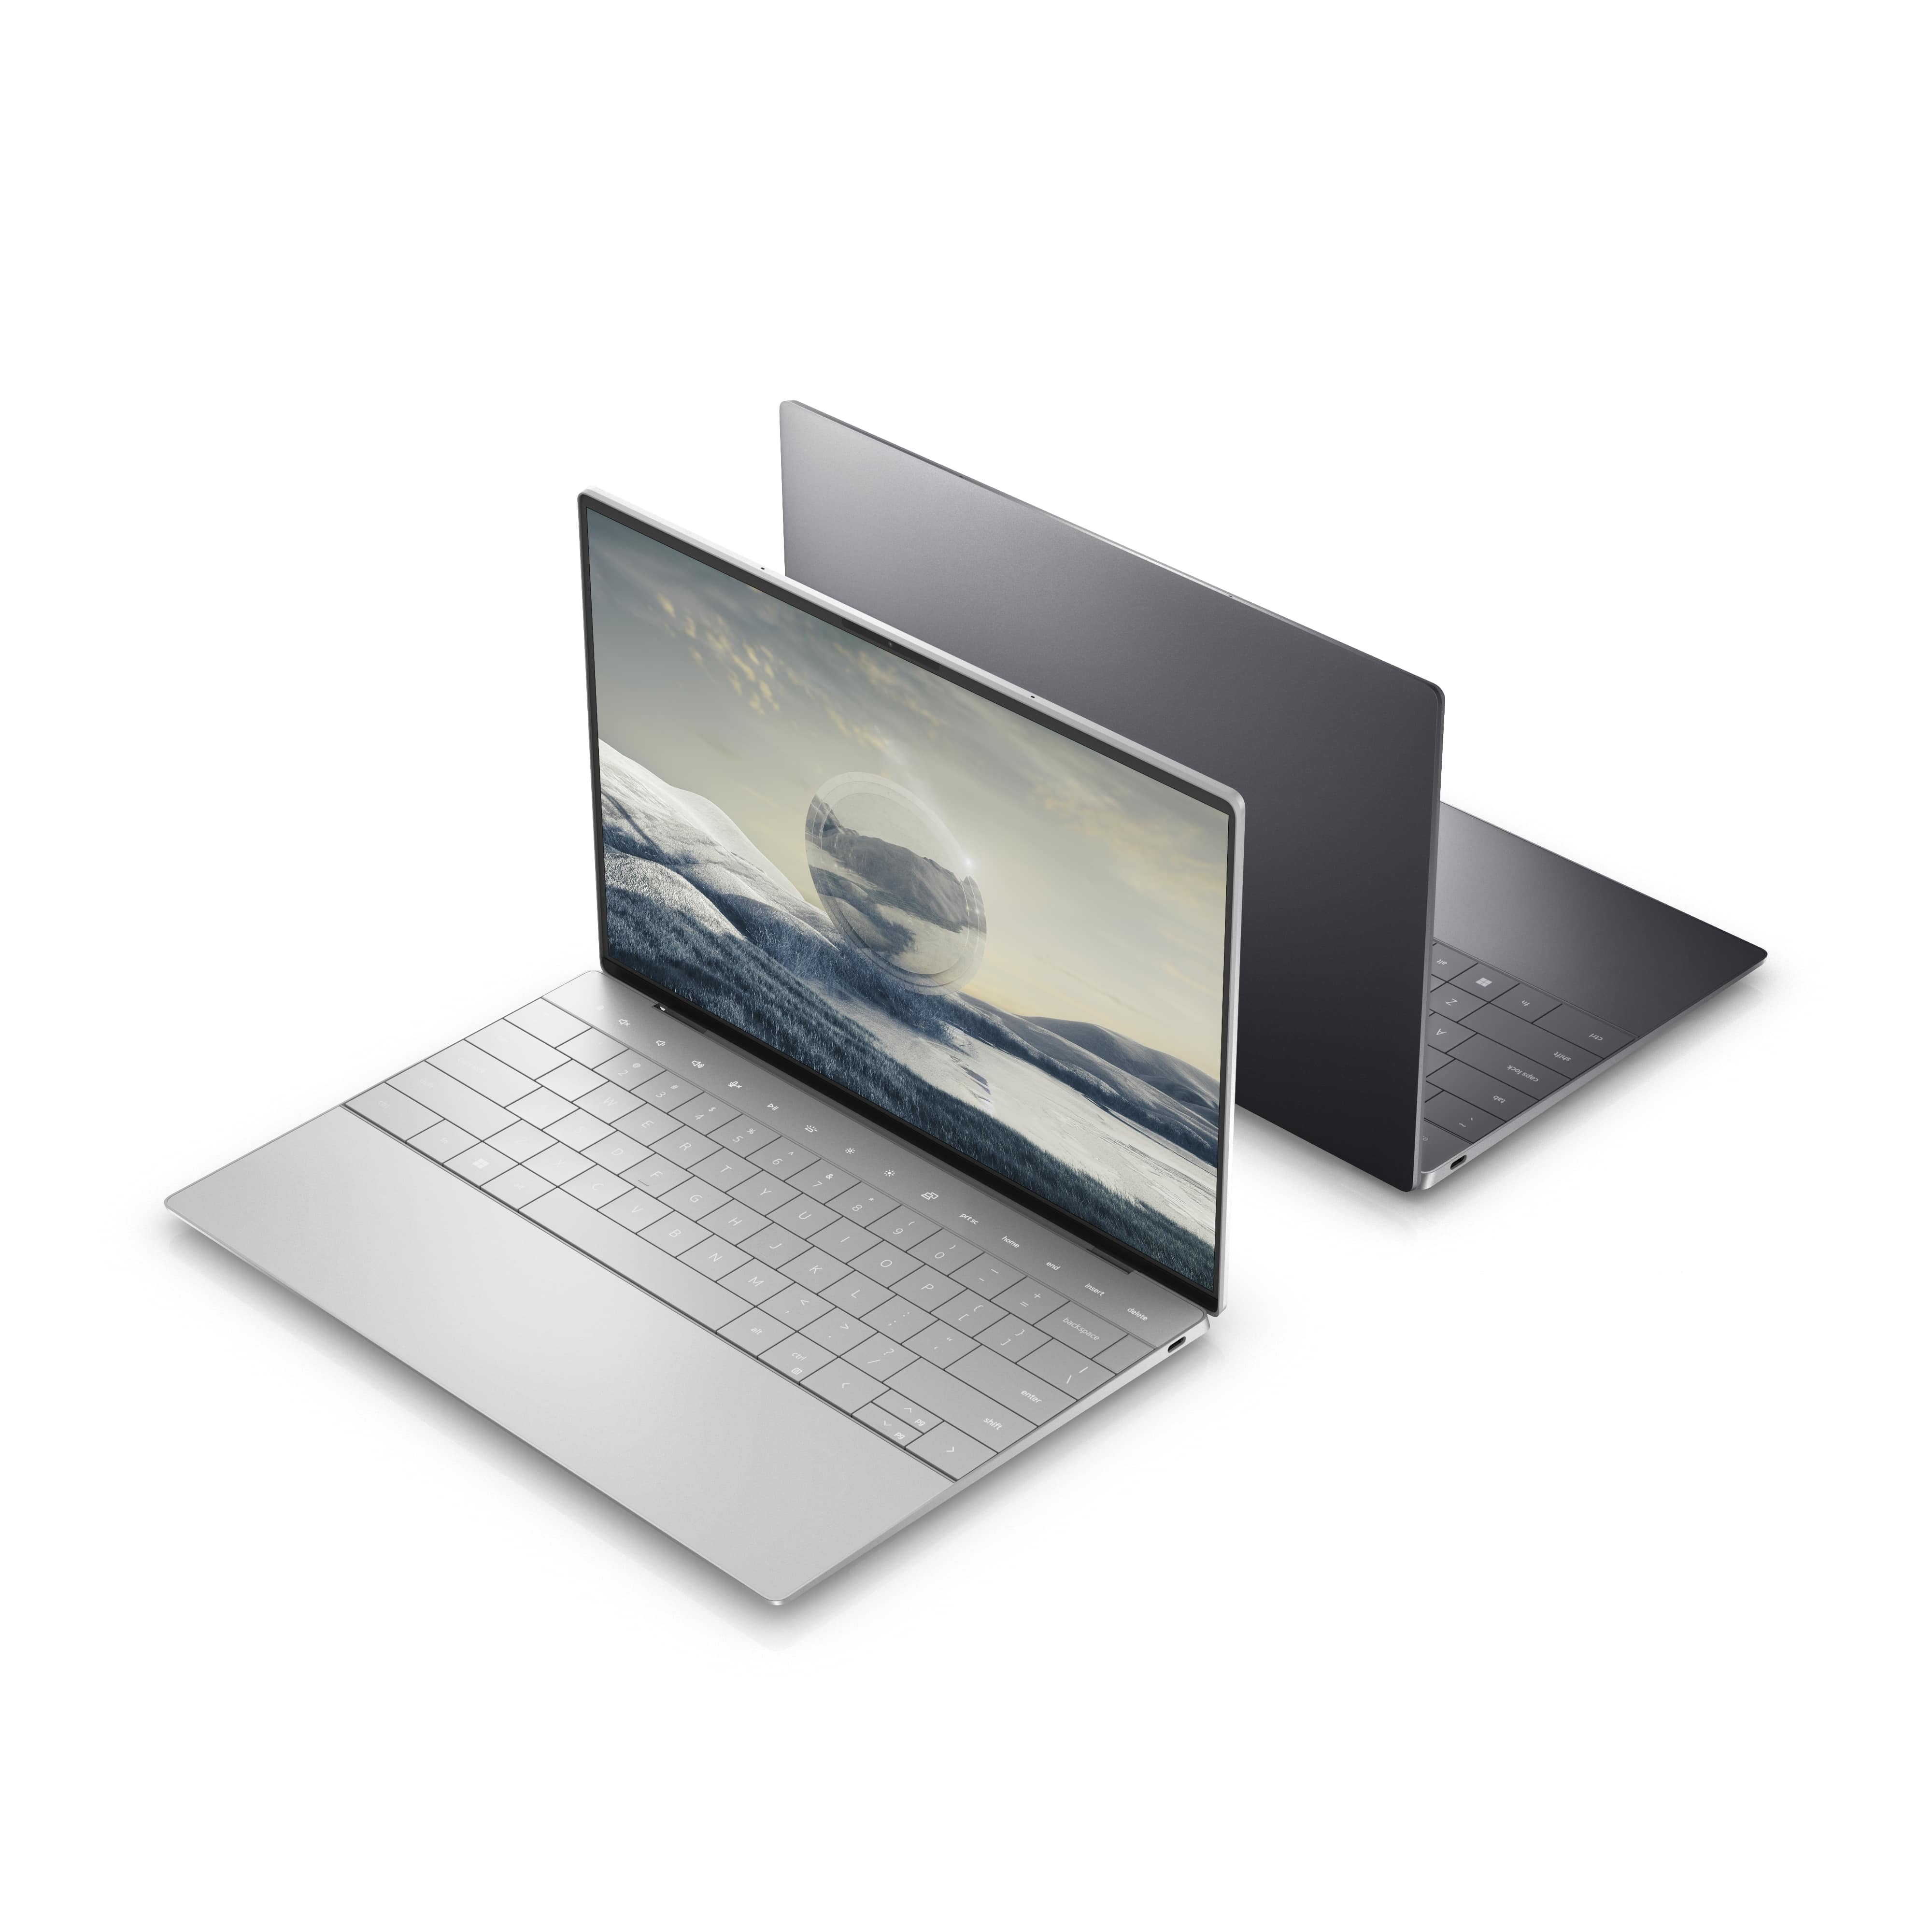 Dell XPS 13 Plus back to back.